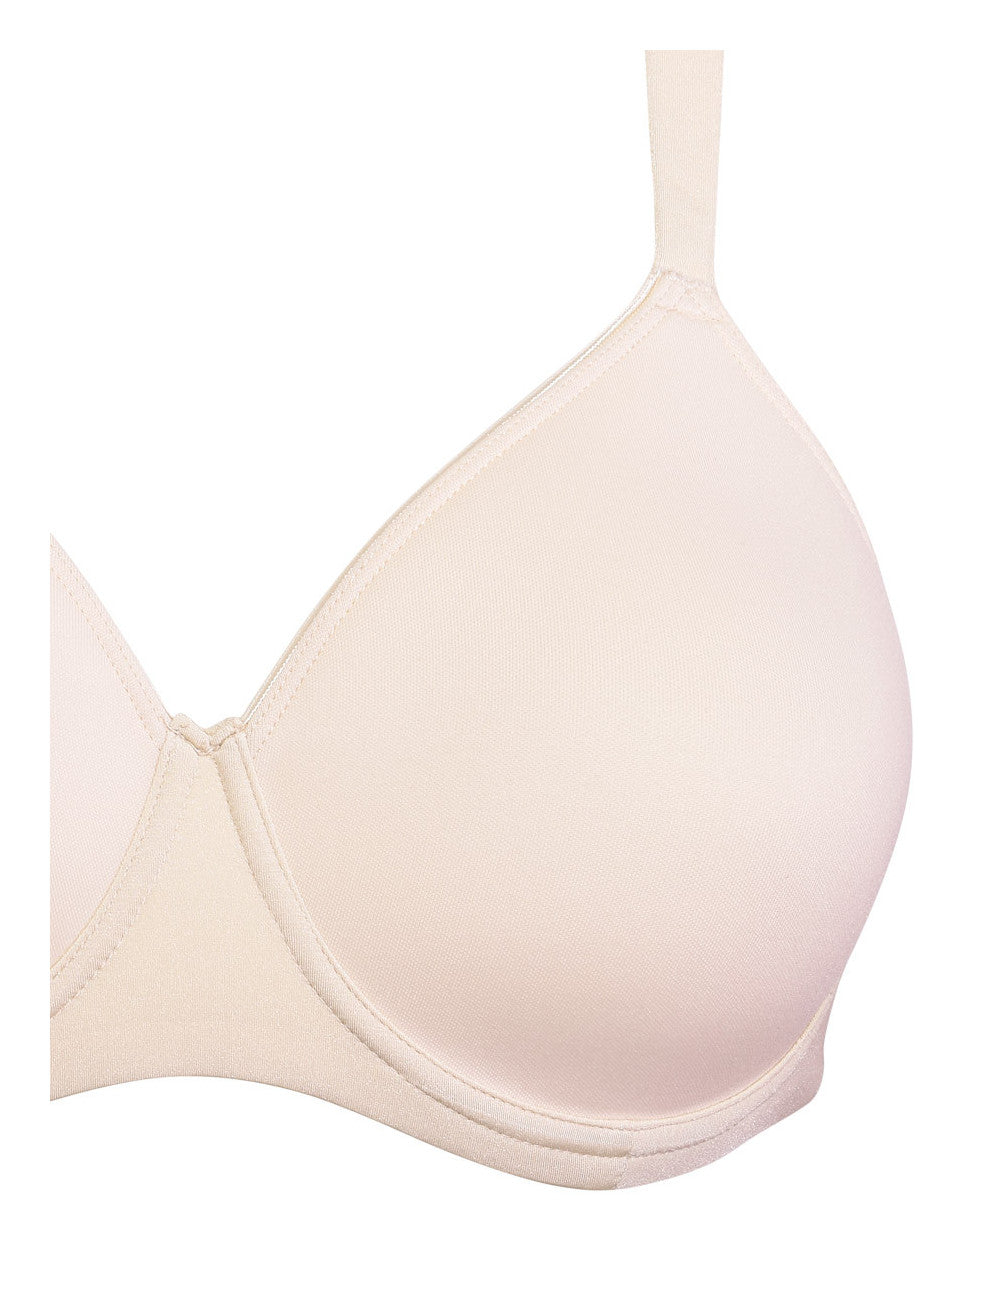 Buy Vanila Lingerie Seamless B Cup Bra for Women & Girls, Moulded Spacer  Cloth in Cup Hosiery Fabric, Beige, 30, Pack of 1 at